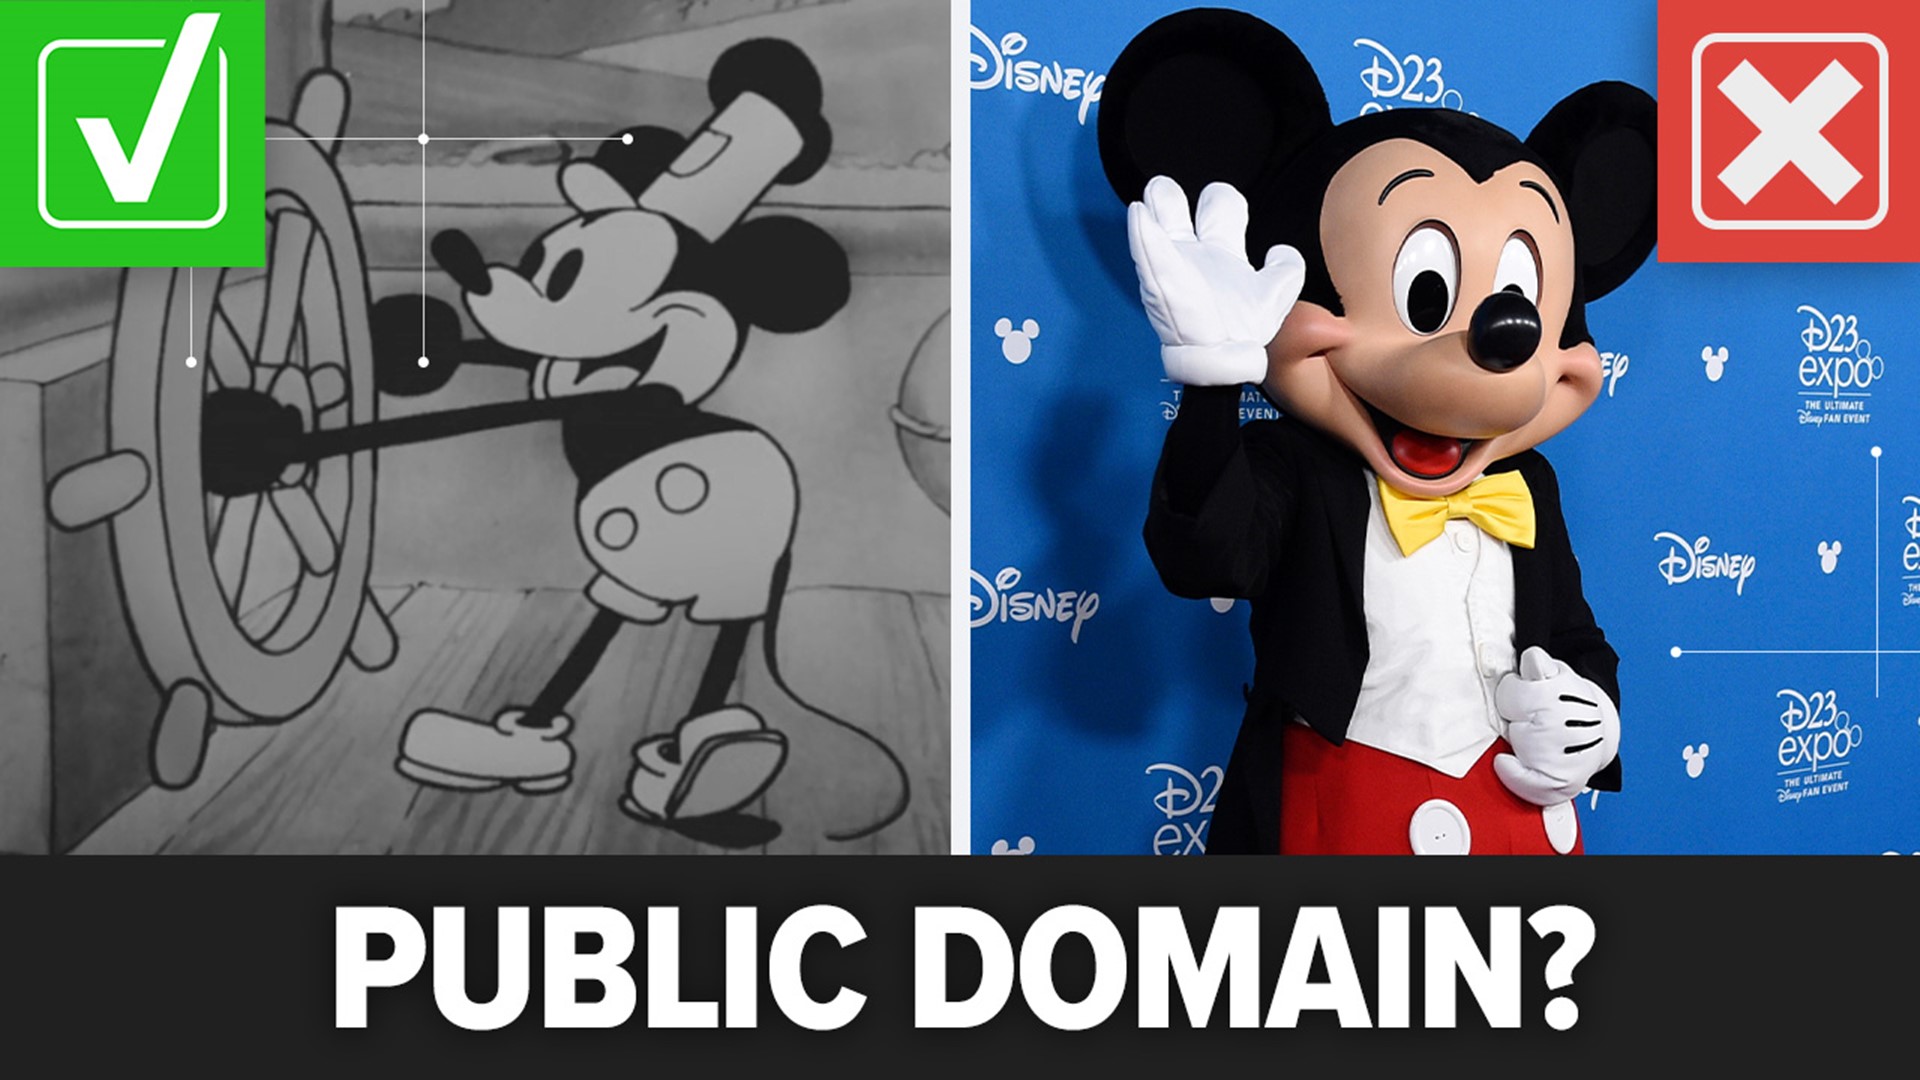 Mickey Mouse’s entire Disney character is not subject to copyright, but his likeness from 1928’s ‘Steamboat Willie’ is public domain.